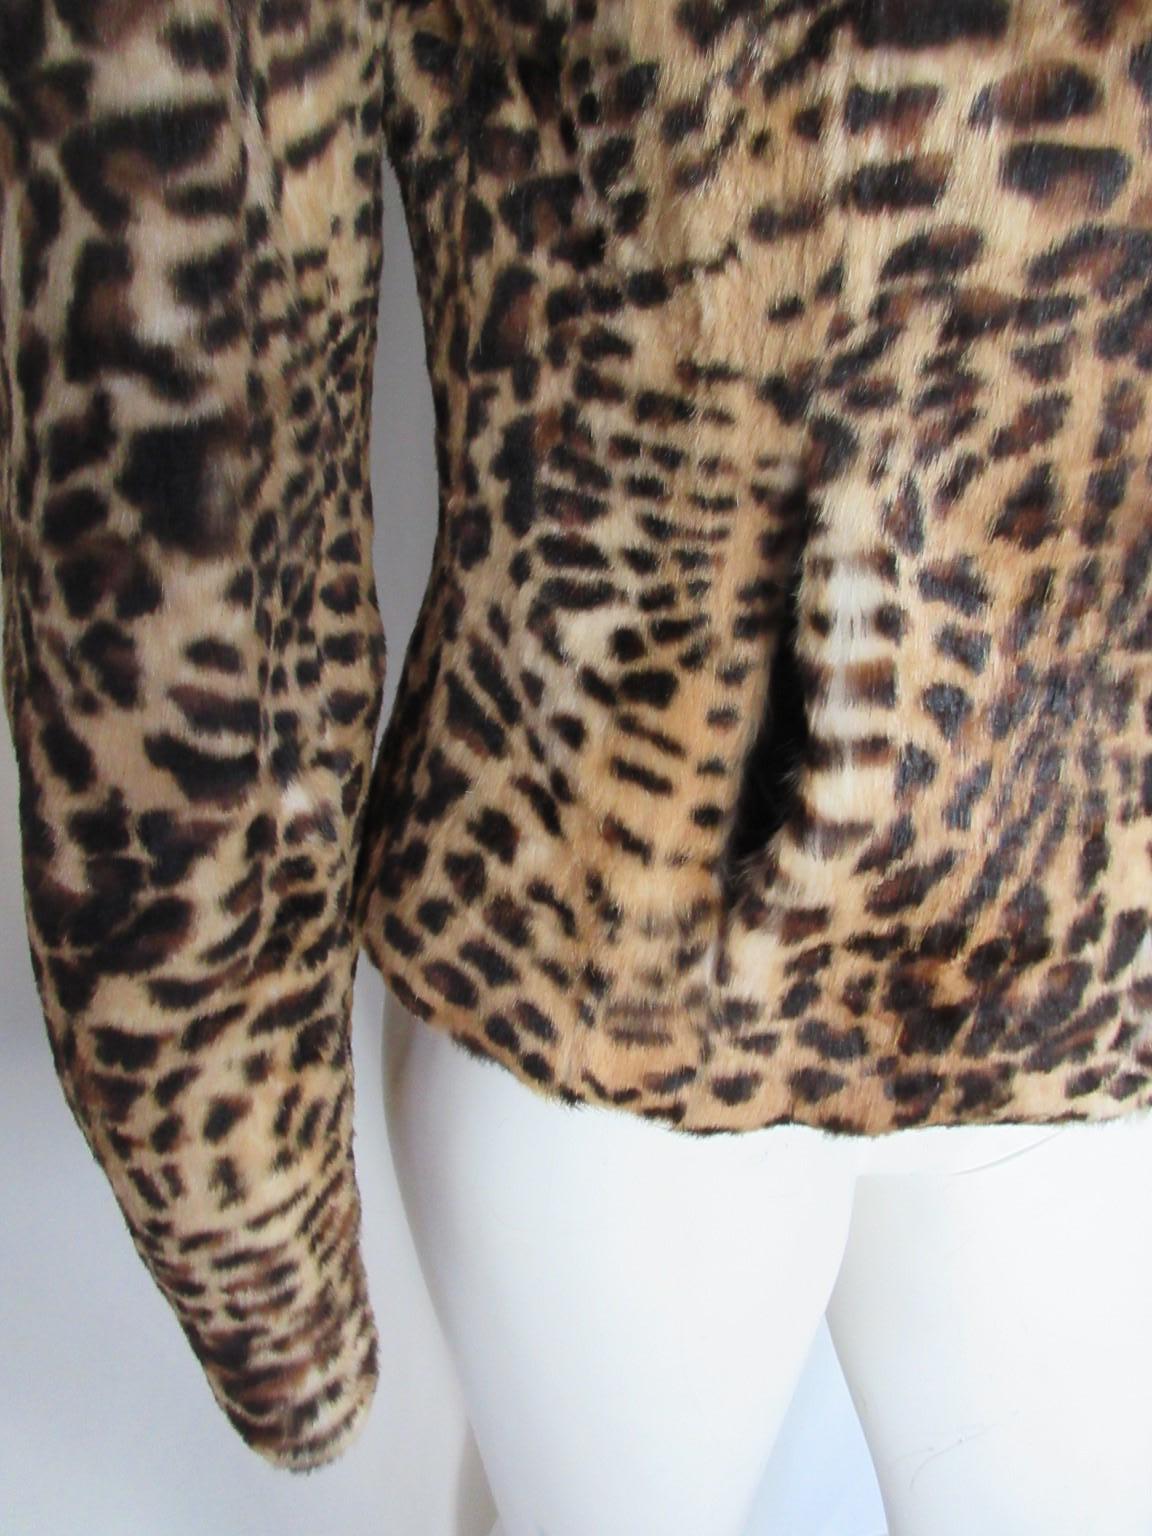 Printed Leopard Lapin vintage fur jacket from John Richmond

We offer more exclusive fur & vintage couture items, view our front store

Details:
2 pockets, 3 closing hooks,
fully lined
white leather panels at the back of sleeves
Soft fur and very